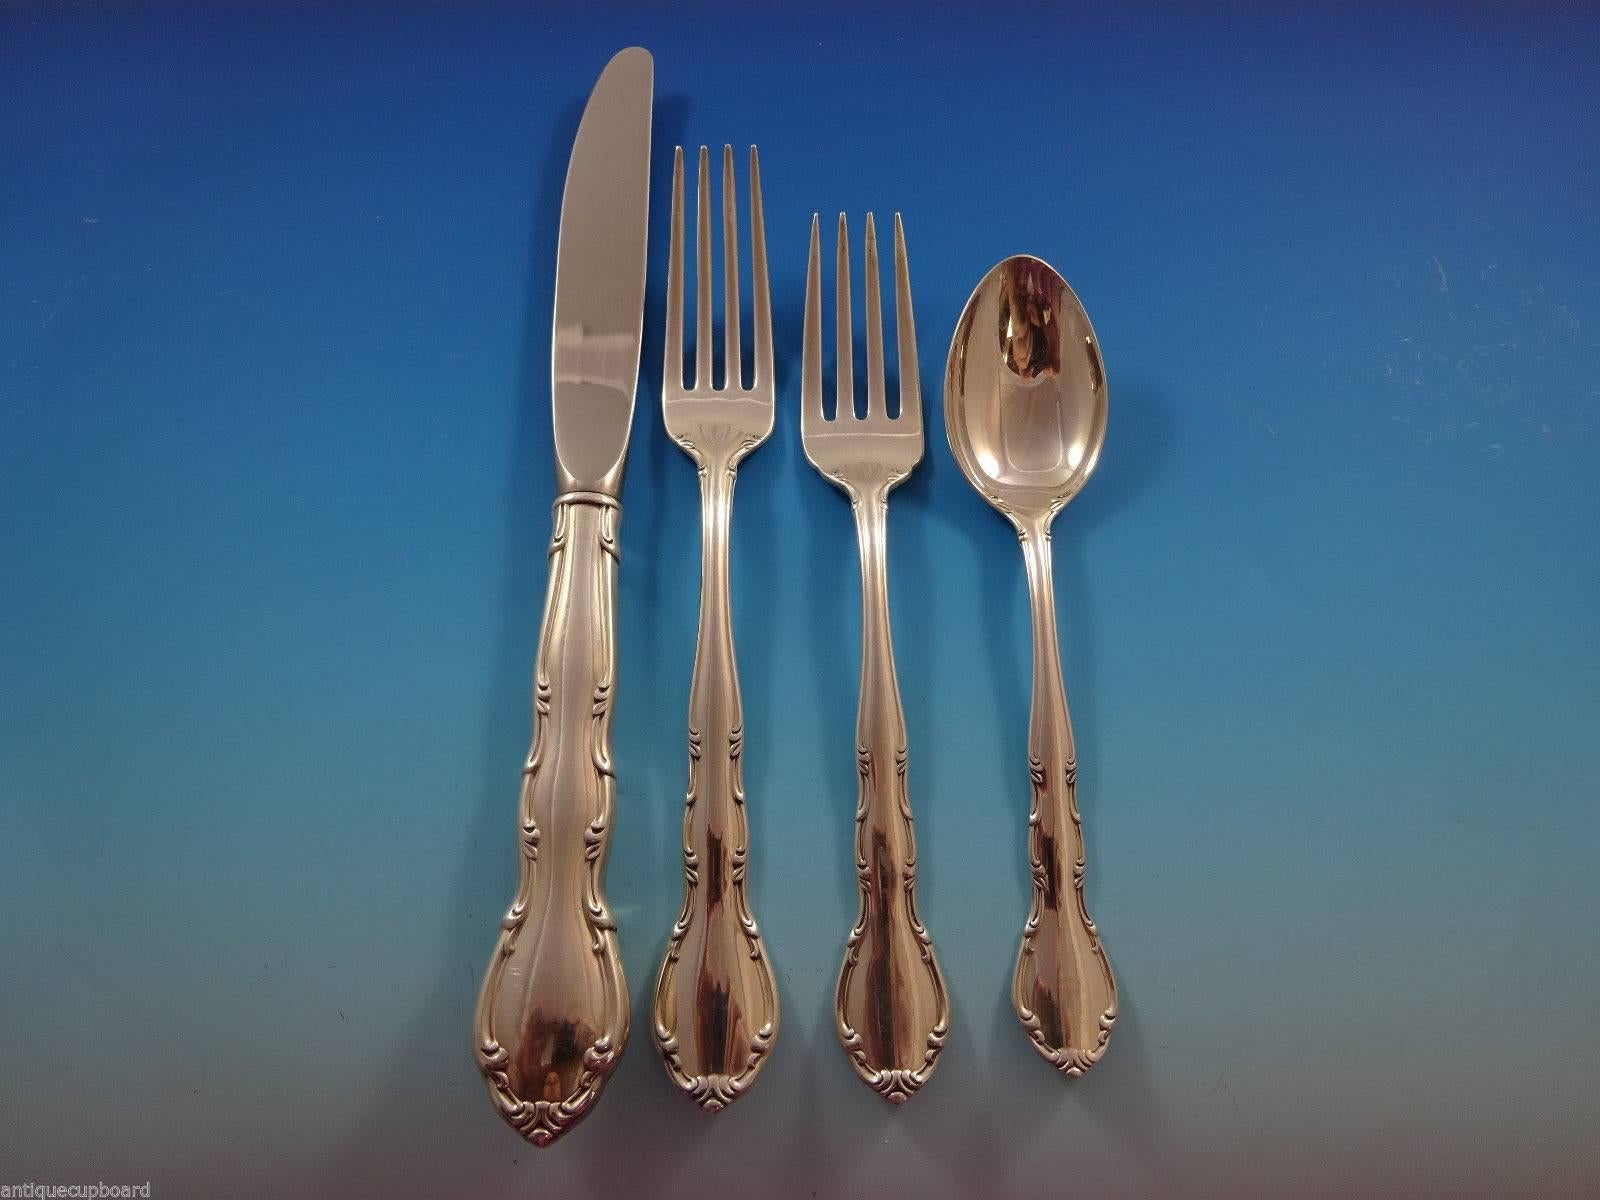 Andante by Gorham sterling silver flatware set of 33 pieces. This set includes:

Eight knives, 9